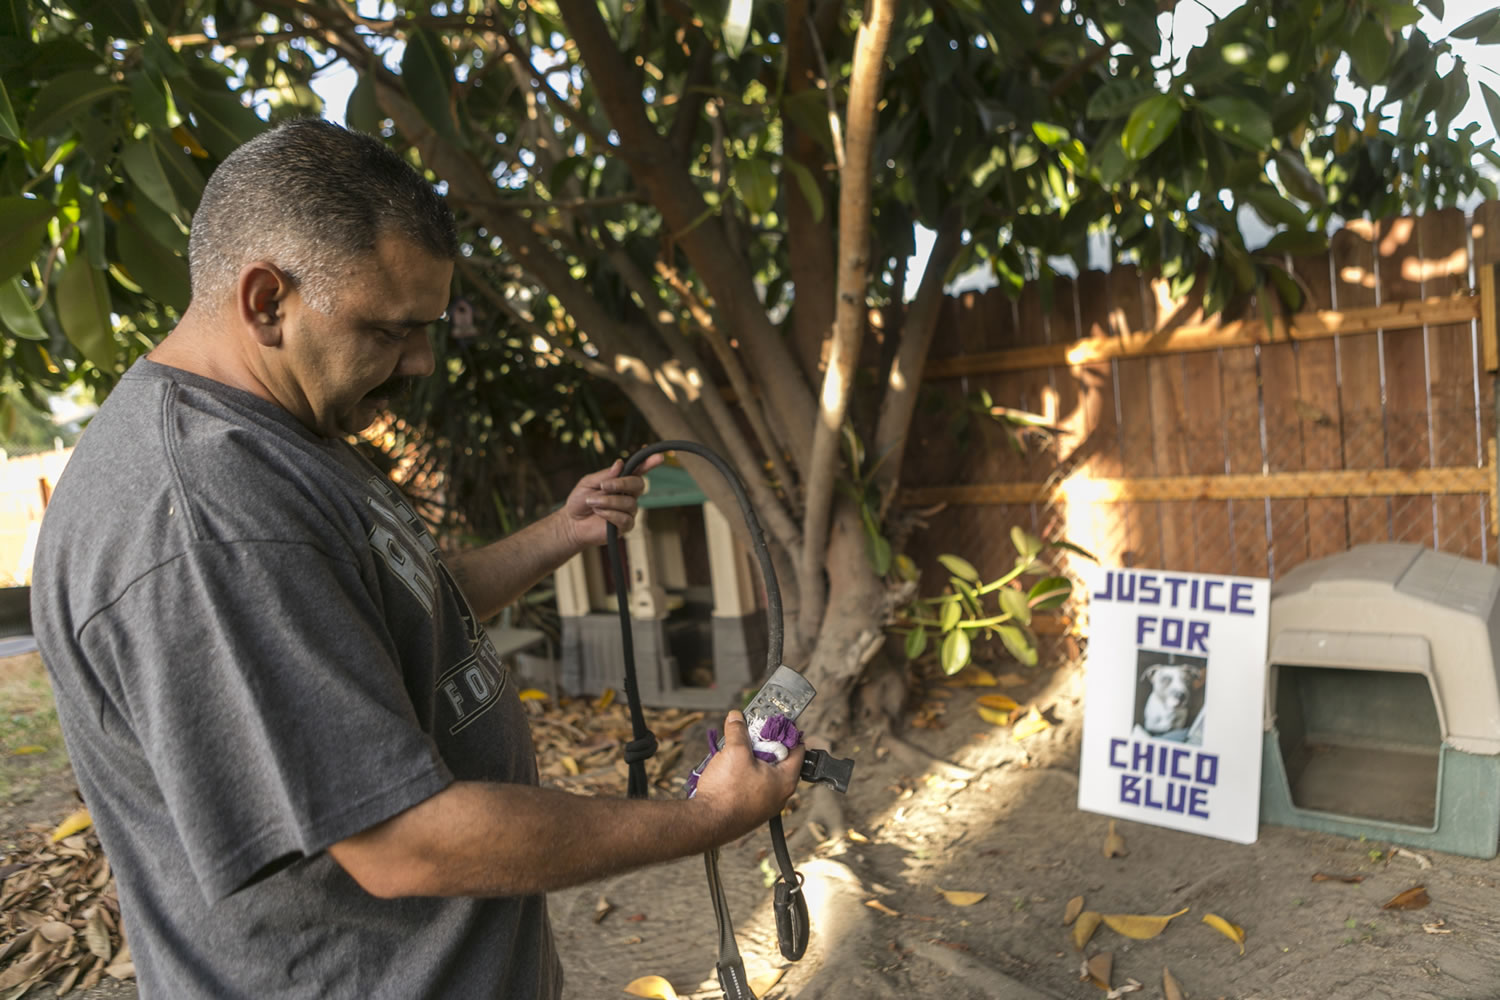 In this Monday, May 19, 2014 photo, former dog owner Arturo Gonzalez poses for a photo with his late dog's collar and toys at his home in Pico Rivera, Calif. Gonzalez's pit bull, Chico Blue, was fatally shot by sheriff's deputies 18 months ago when the deputies came to ask Gonzalez about a shooting that wounded his brother. The deputies say the dog foamed at the mouth while walking down the driveway. Feeling threatened by the dog, the deputies threw a chair, sprayed the dog with mace and shot him twice with a handgun. The dog bled to death in a patrol car. The majority of shootings in most U.S. police departments involve animals, usually dogs, and experts say a new series of videos can help change often quick-trigger decisions fueled by fear.